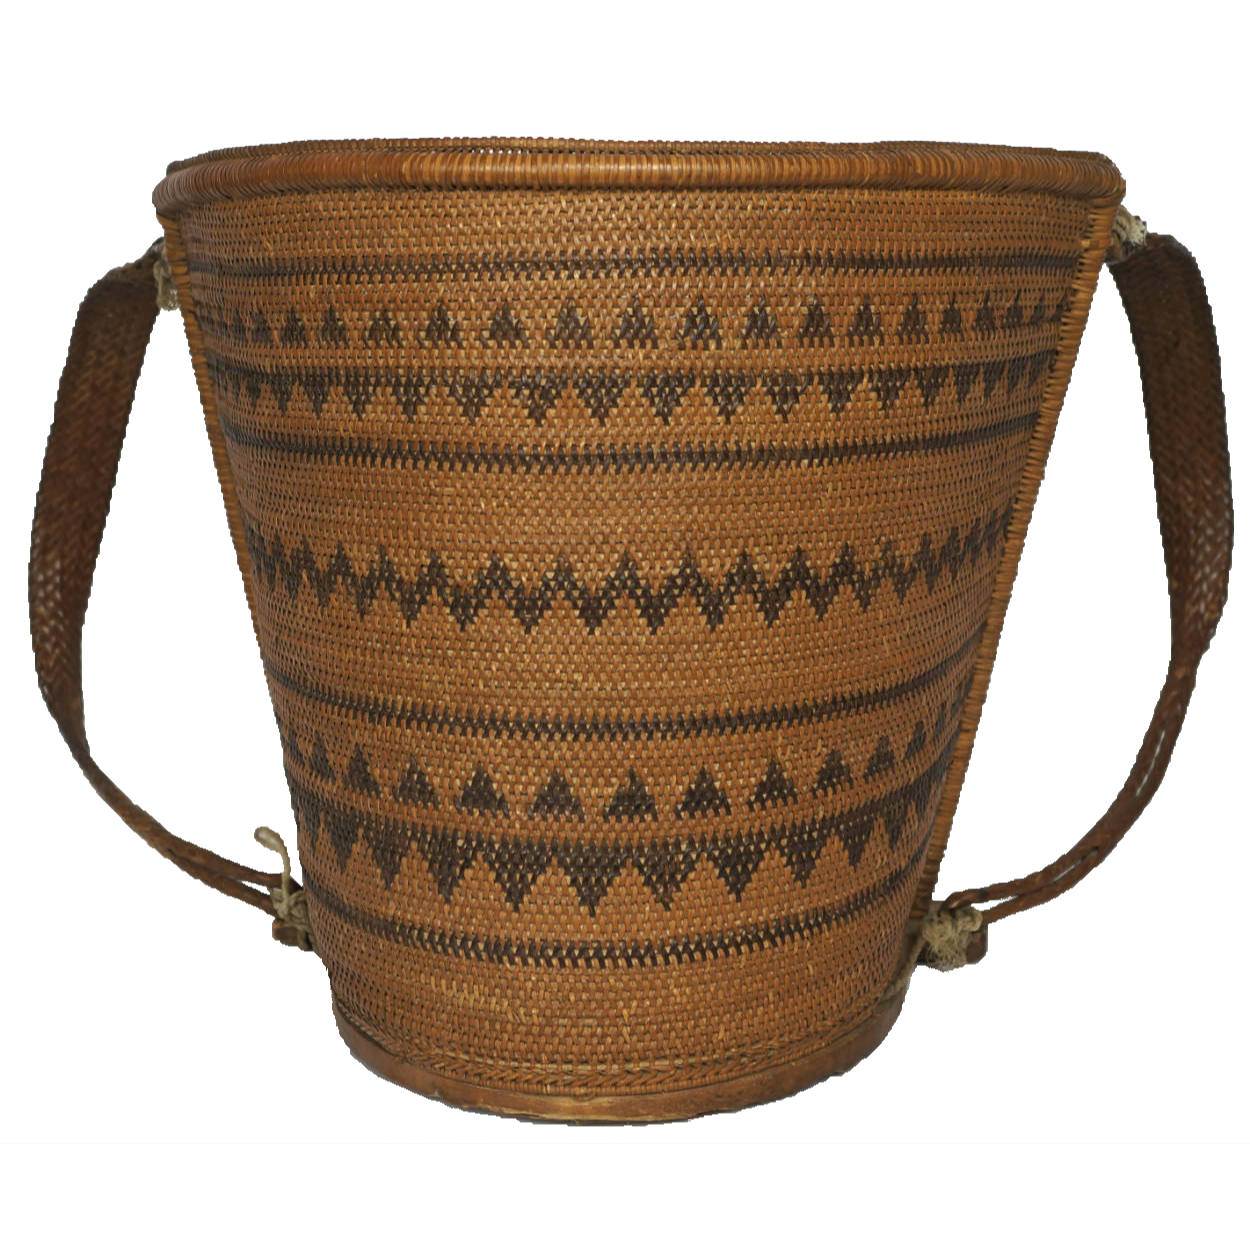 Dayak Tribe Baby Carrier Borneo Indonesia Mid 20th Century Woven Rattan  Basket